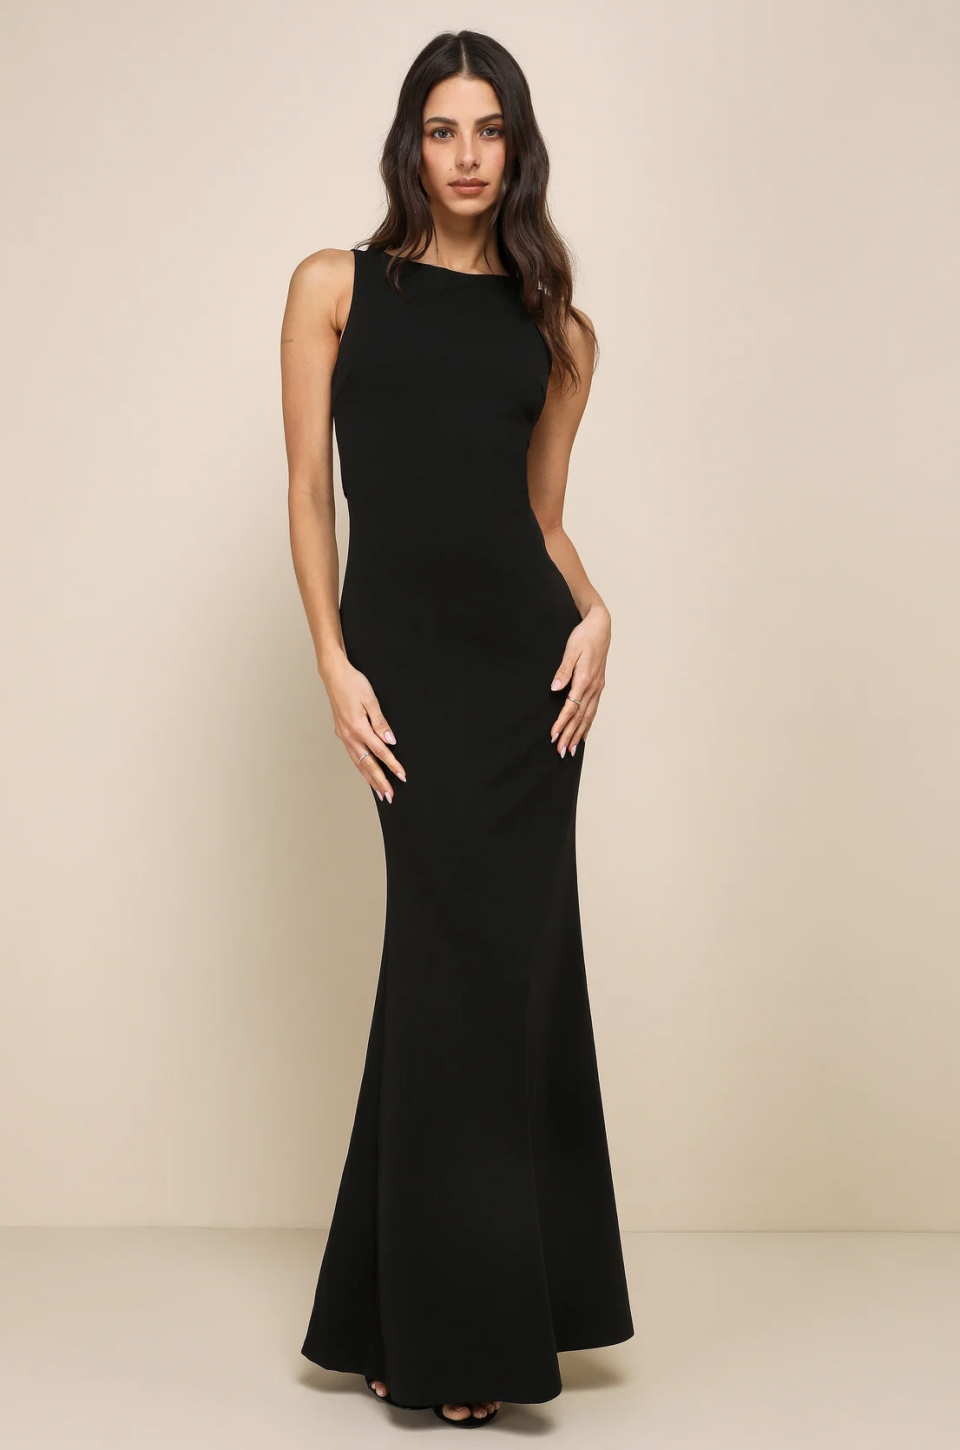 Love In Your Eyes Black Knotted Mermaid Maxi Dress (Photo via Lulus)